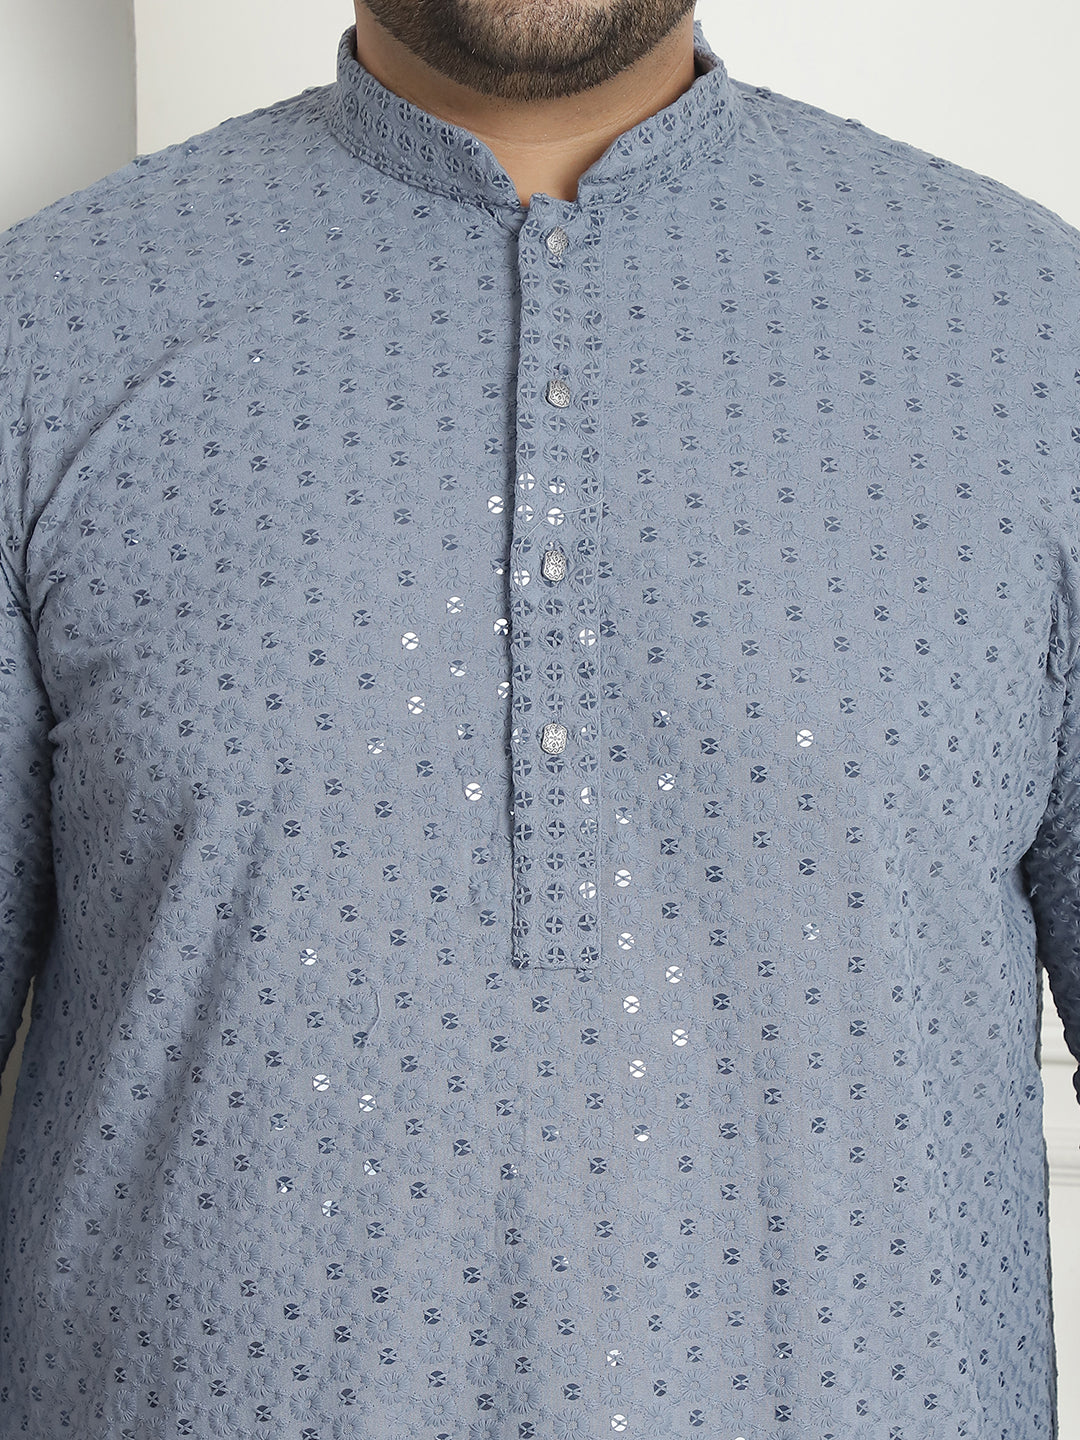 Men's Cotton Sequinned Embroidered Grey